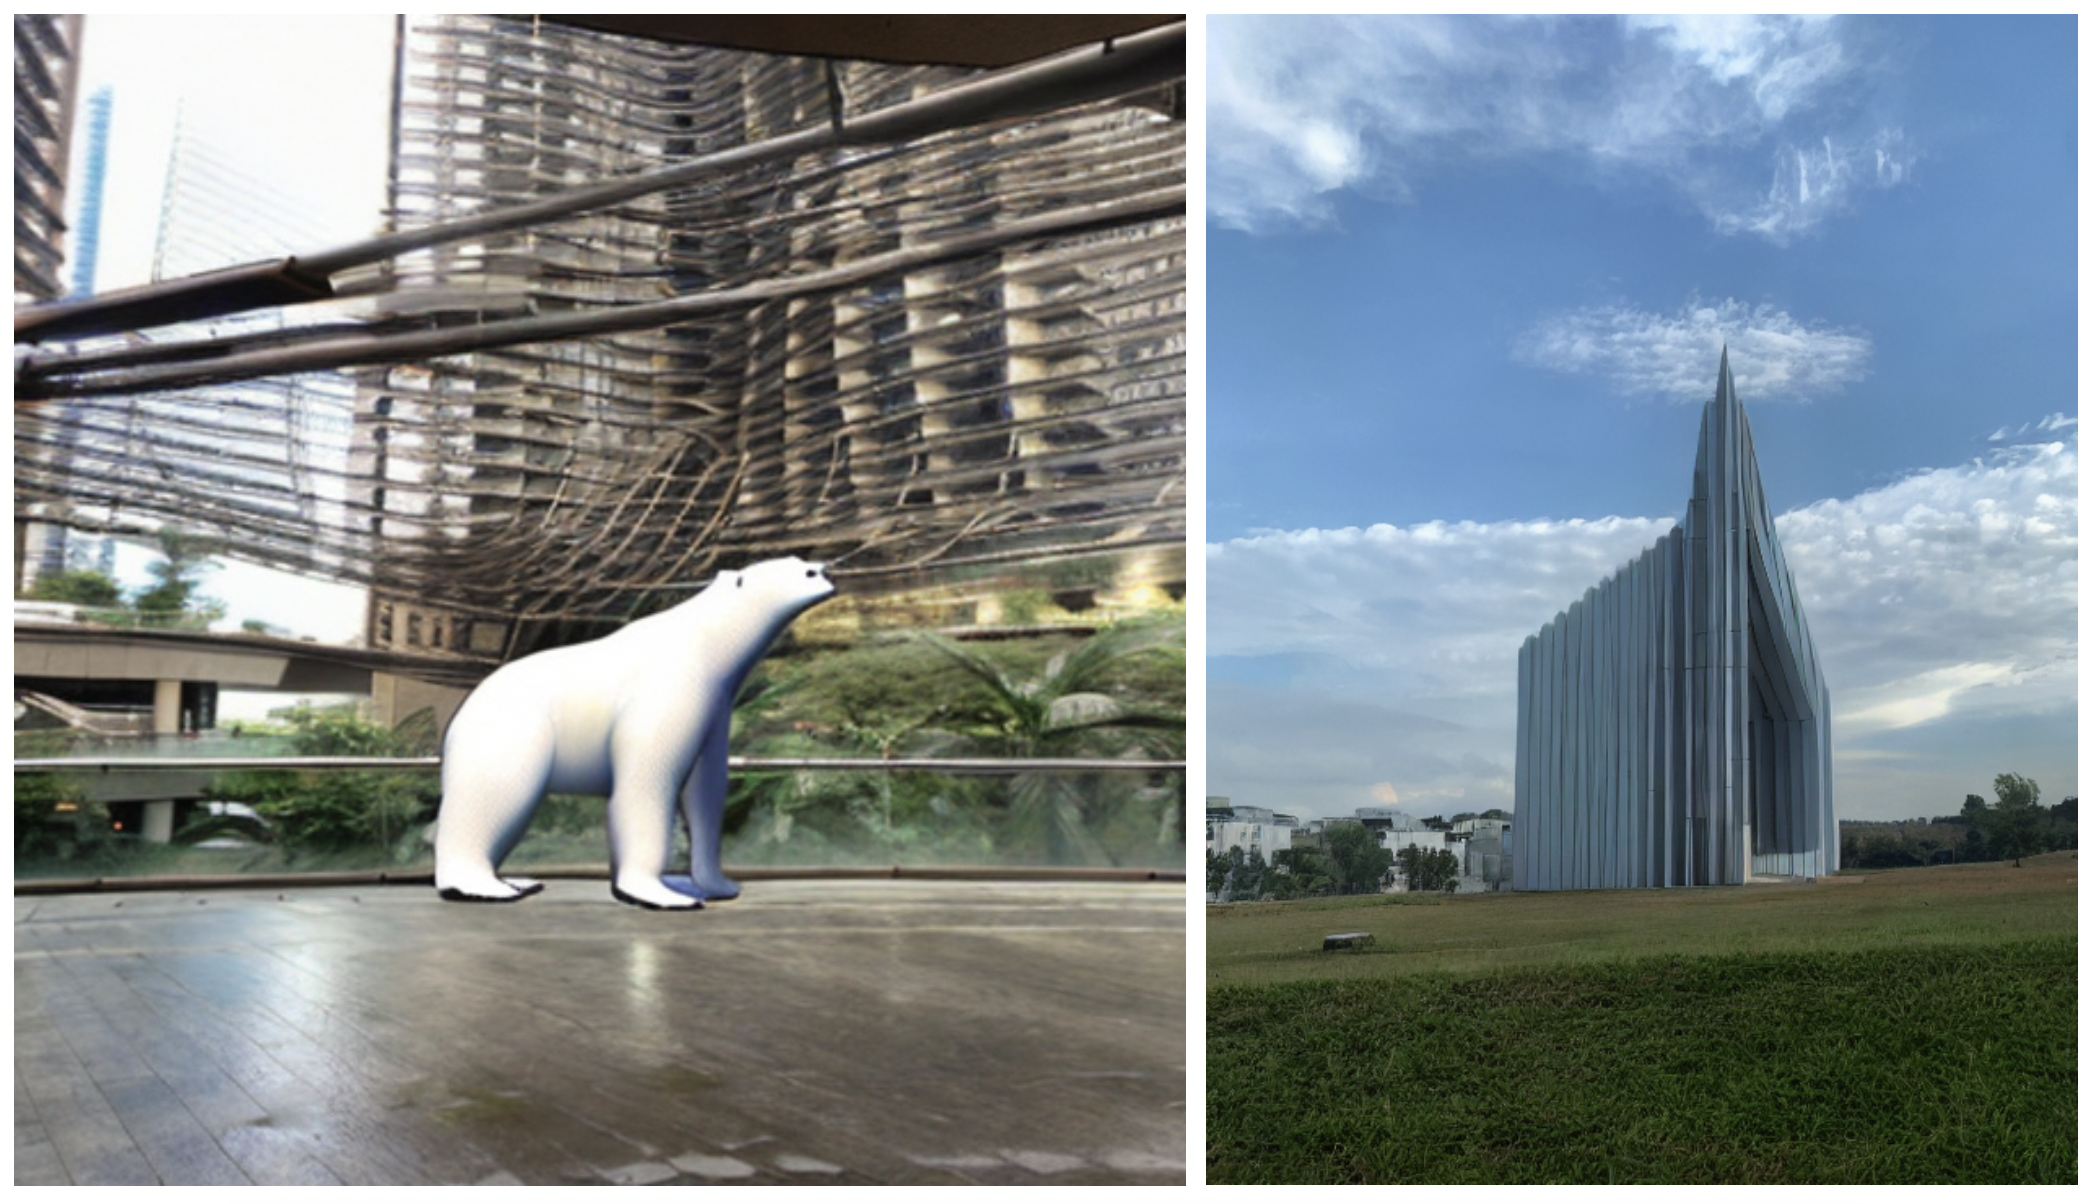 Comparison of drawing-like image of bear composited to a photo and realistic architecture image